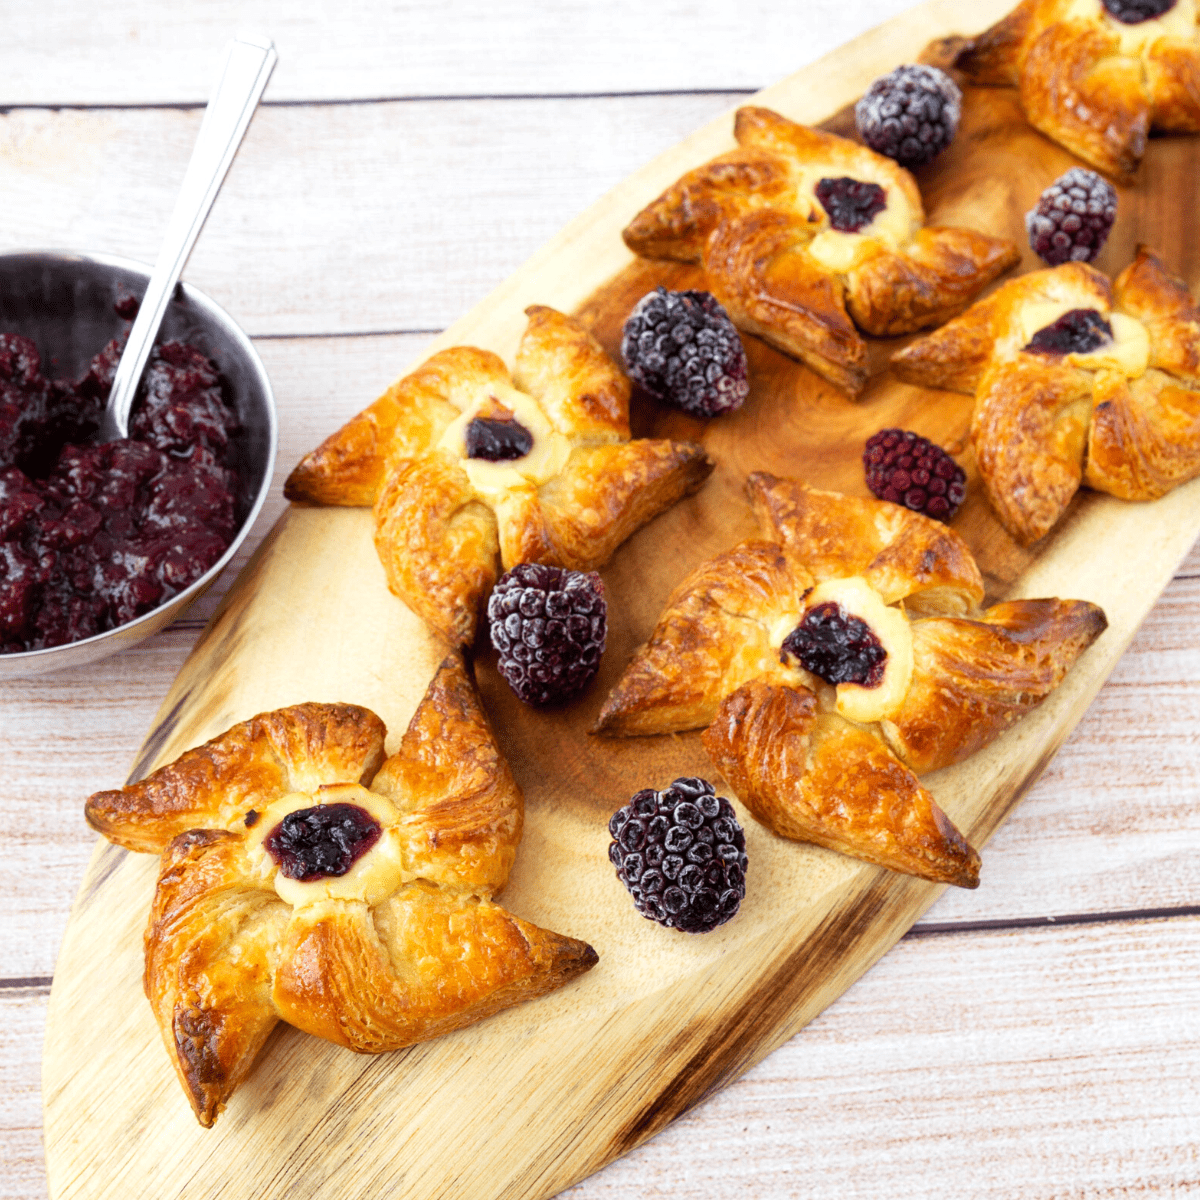 Pinwheel Danishes on a wooden board.